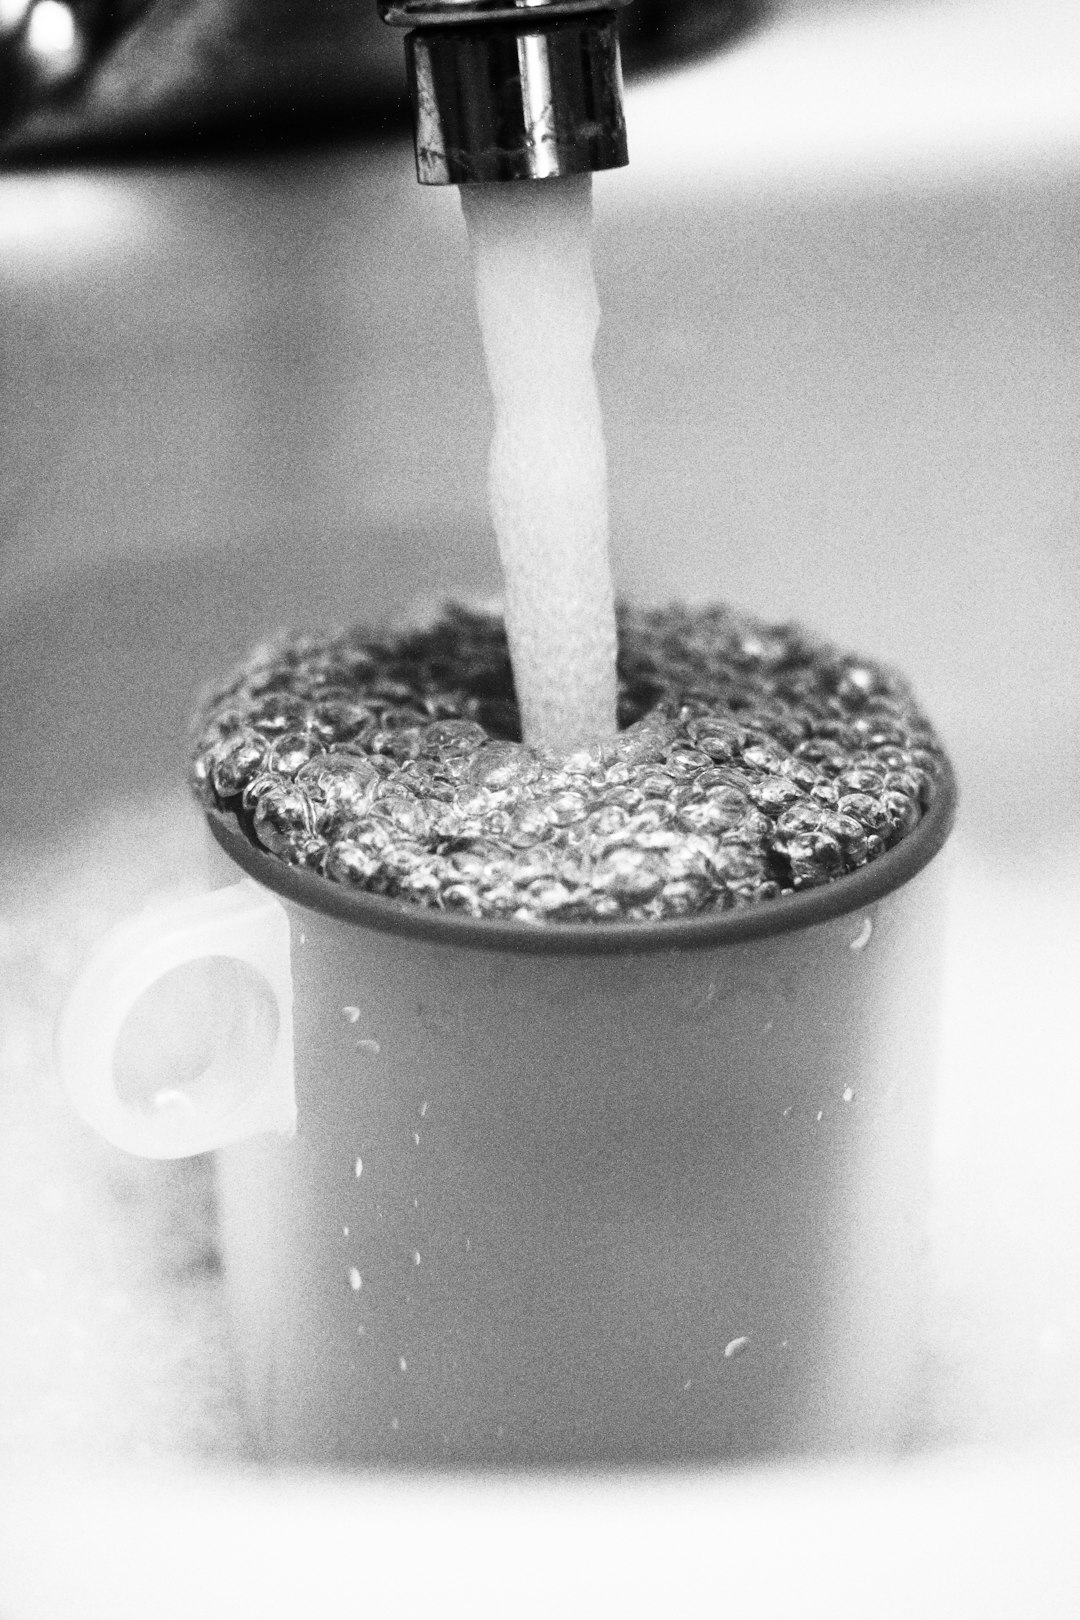 grayscale photo of water pouring in container